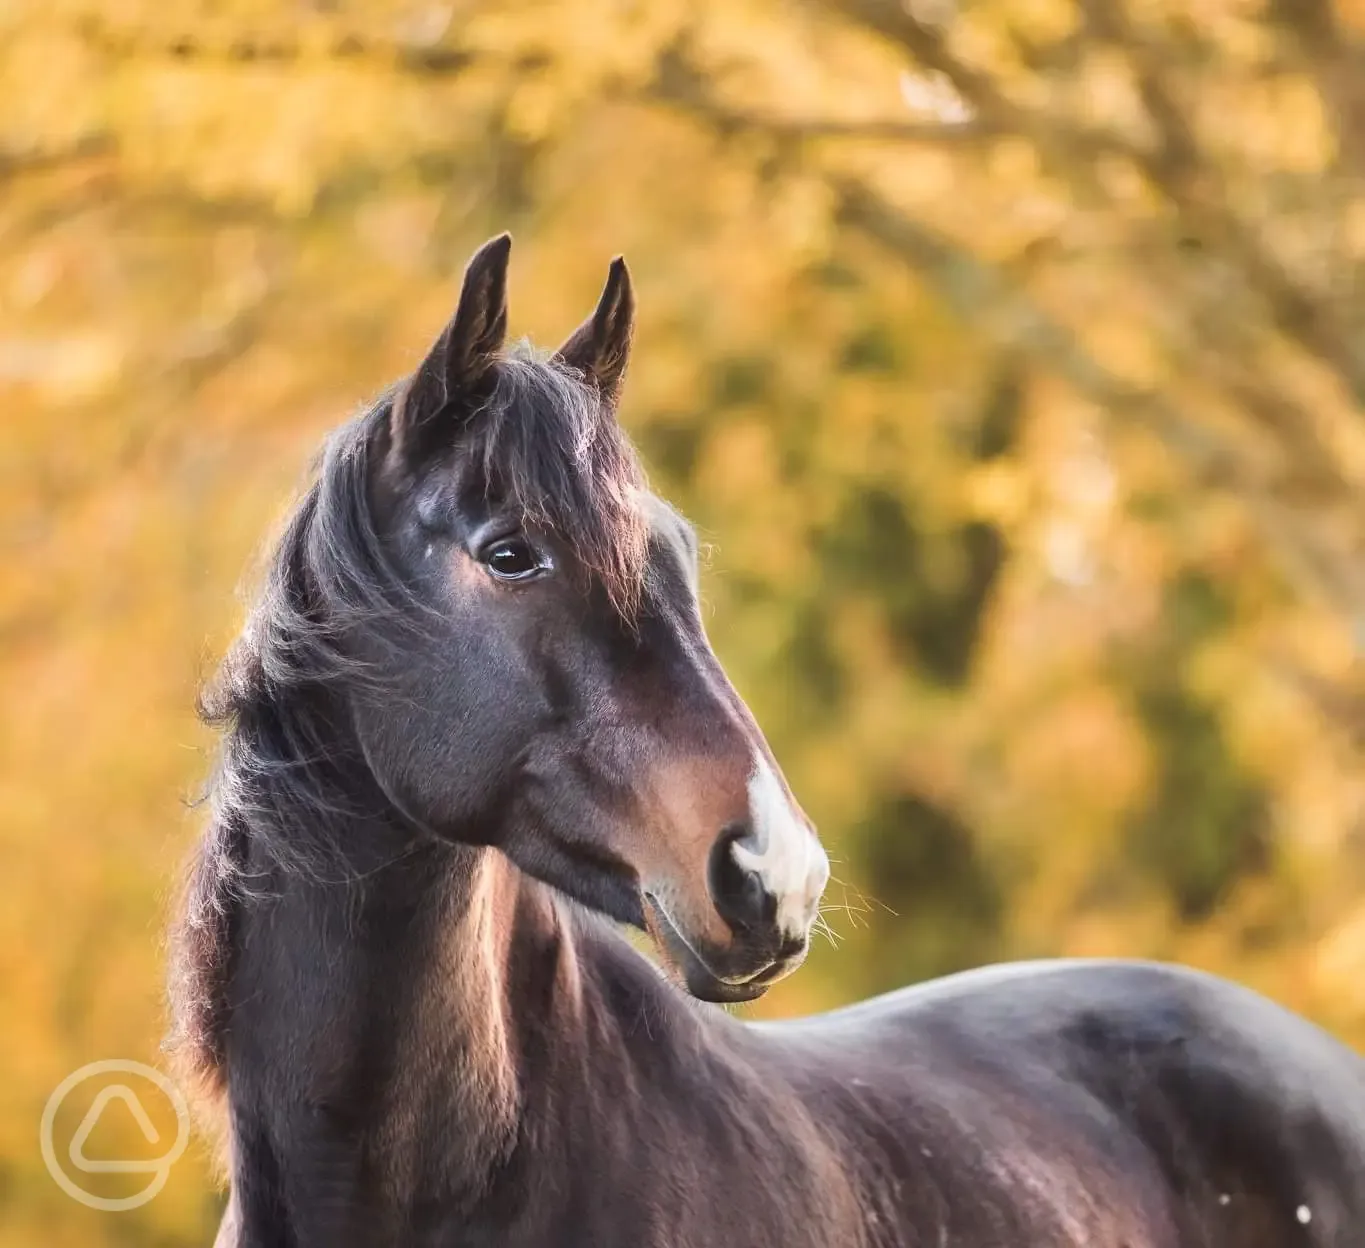 Evie, one of our stunning equine residents